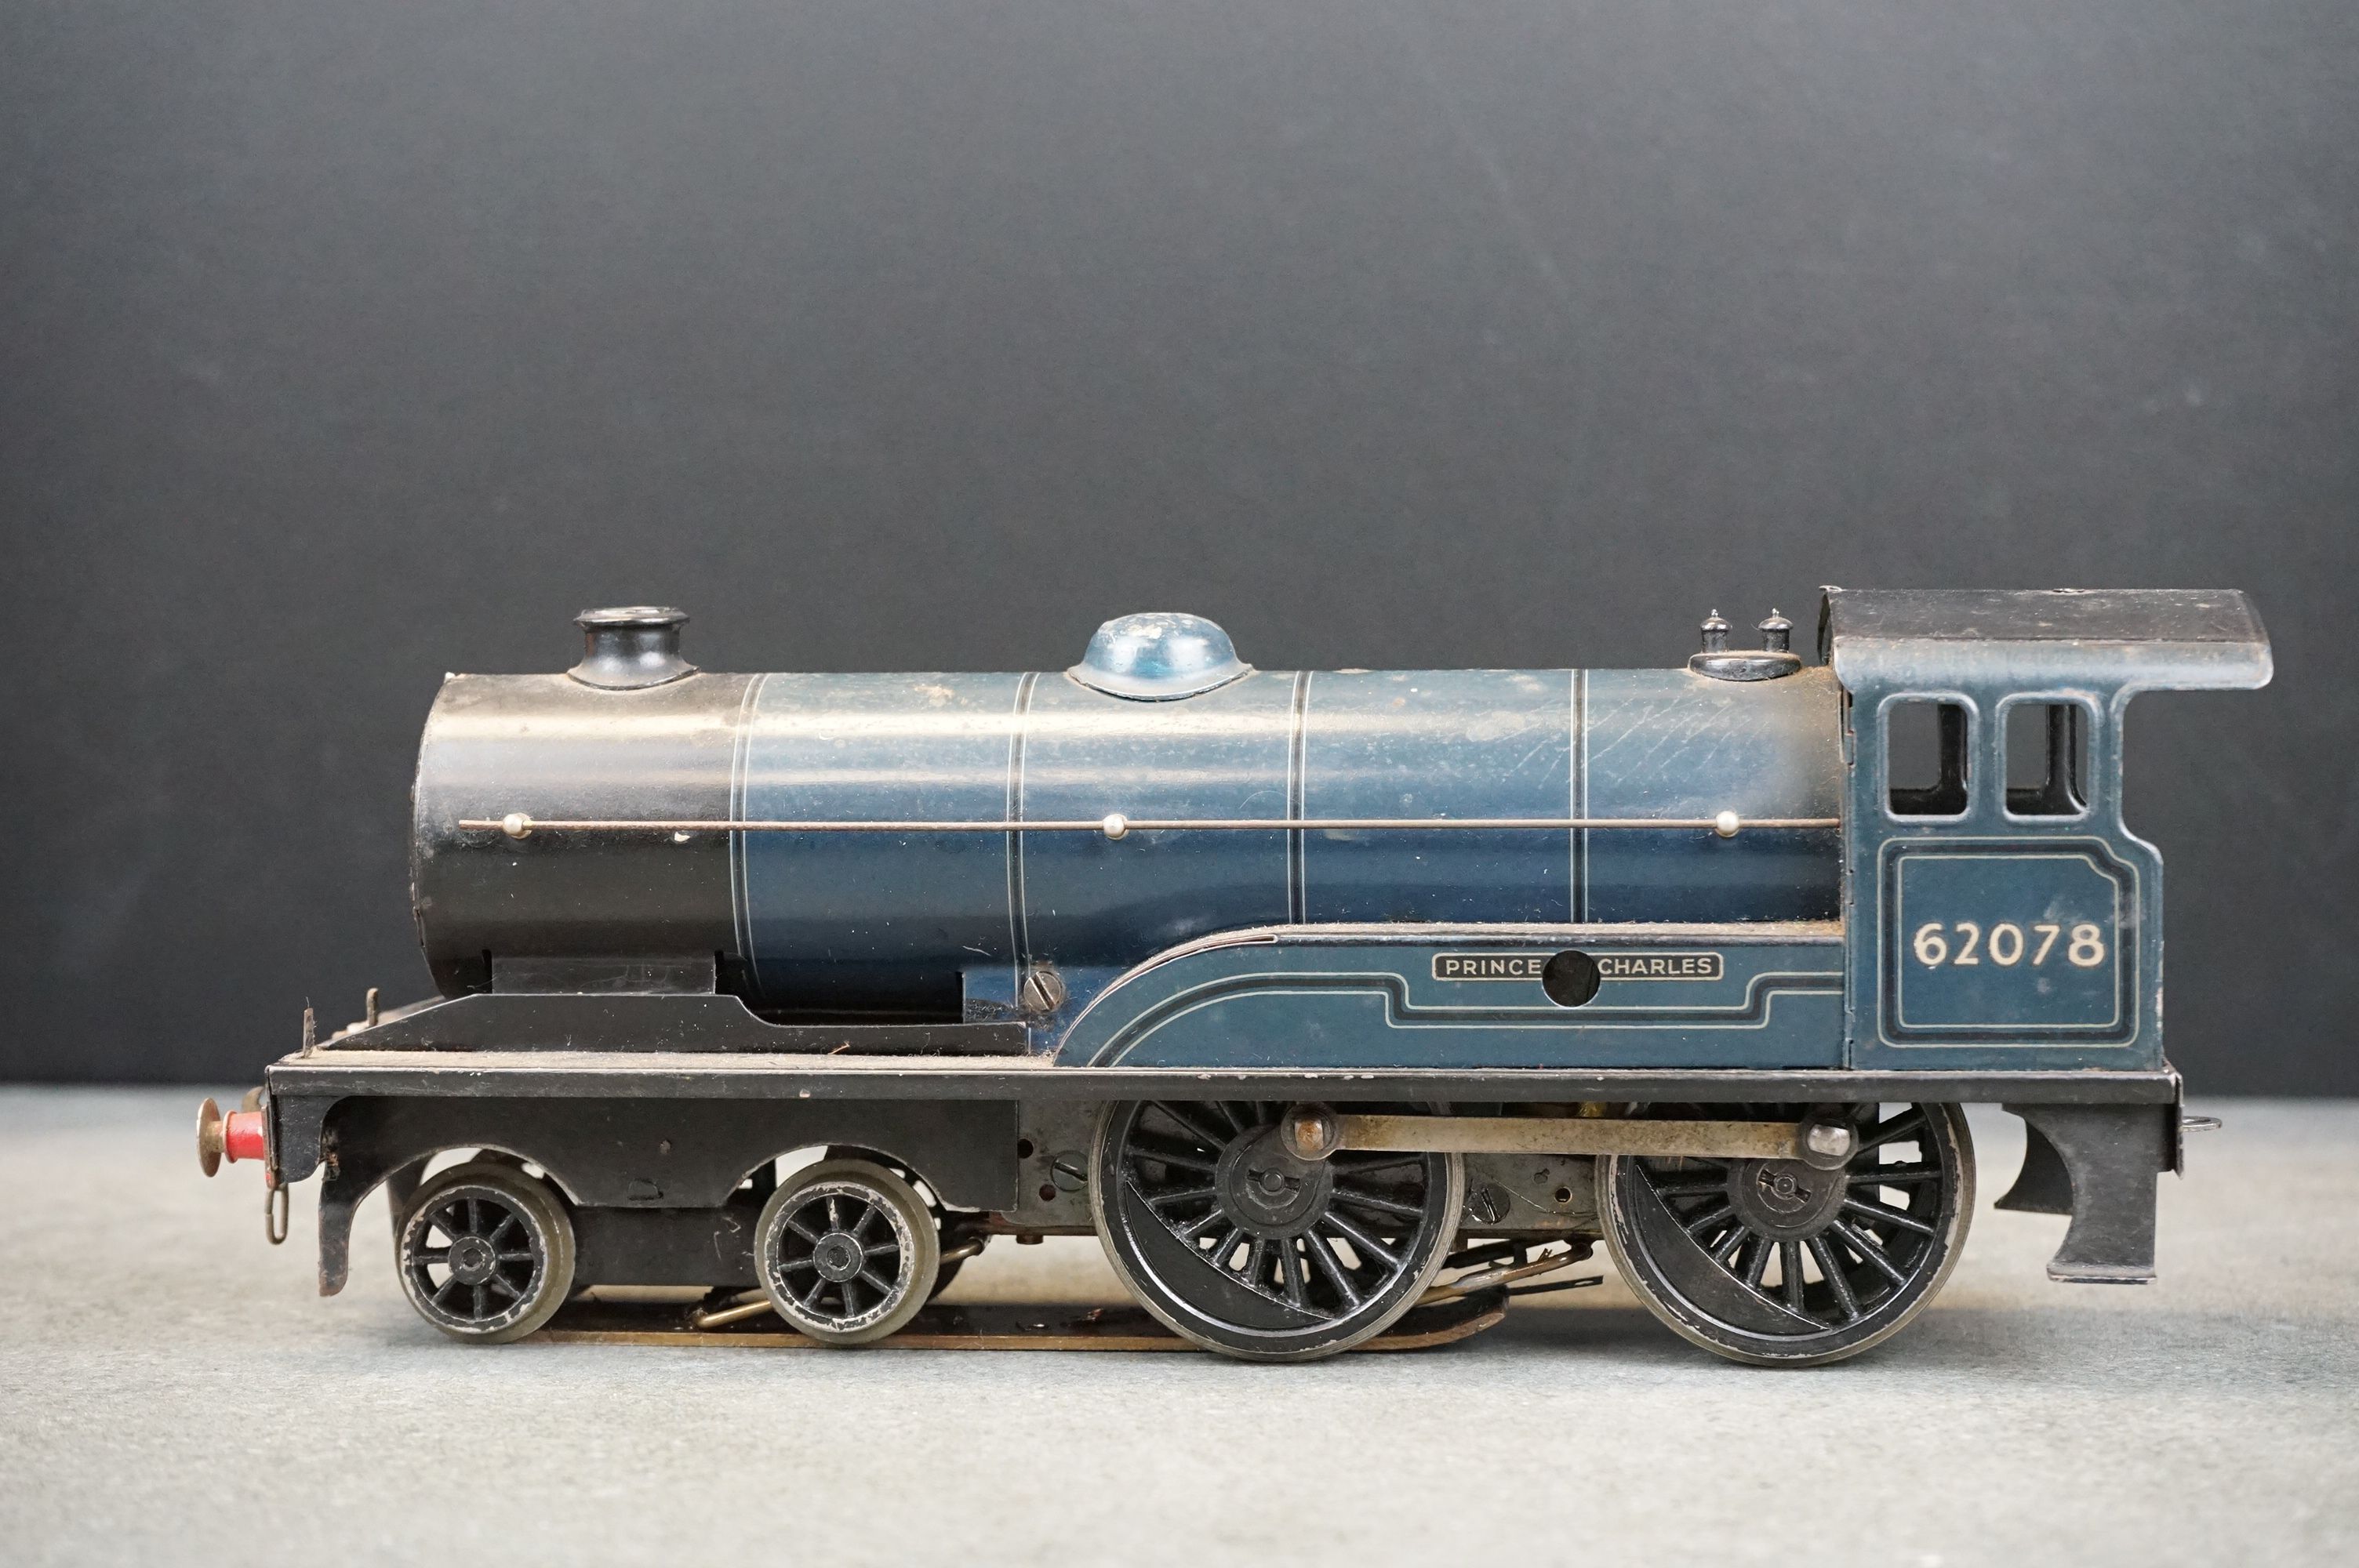 Bassett Lowke O gauge Prince Charles 62078 BR locomotive and tender, showing some play wear but gd - Image 4 of 10